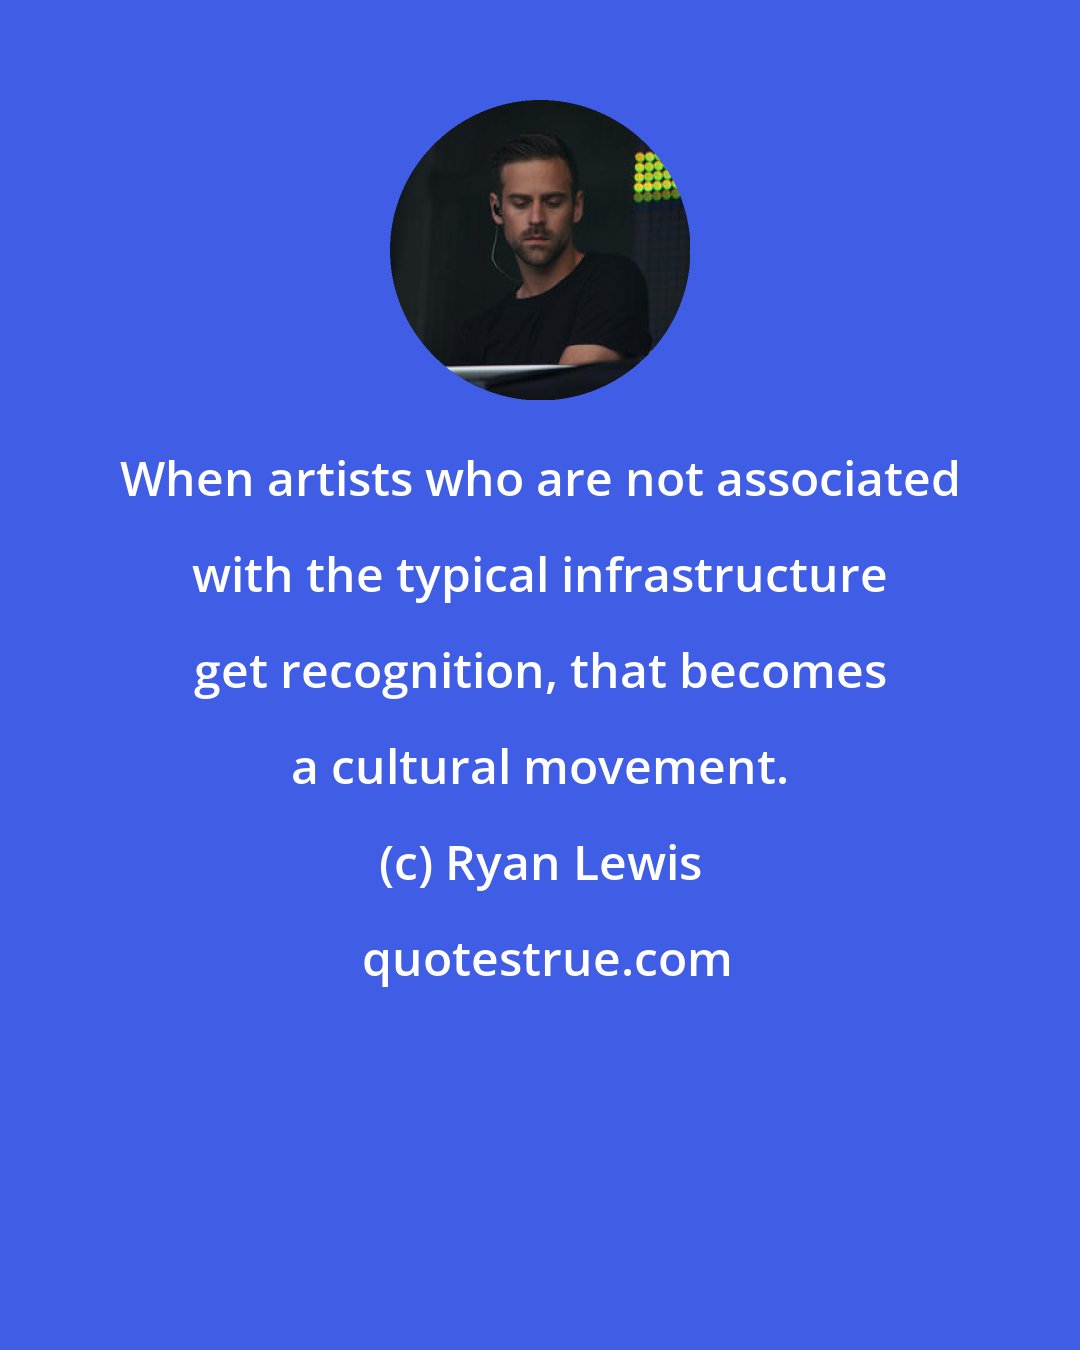 Ryan Lewis: When artists who are not associated with the typical infrastructure get recognition, that becomes a cultural movement.